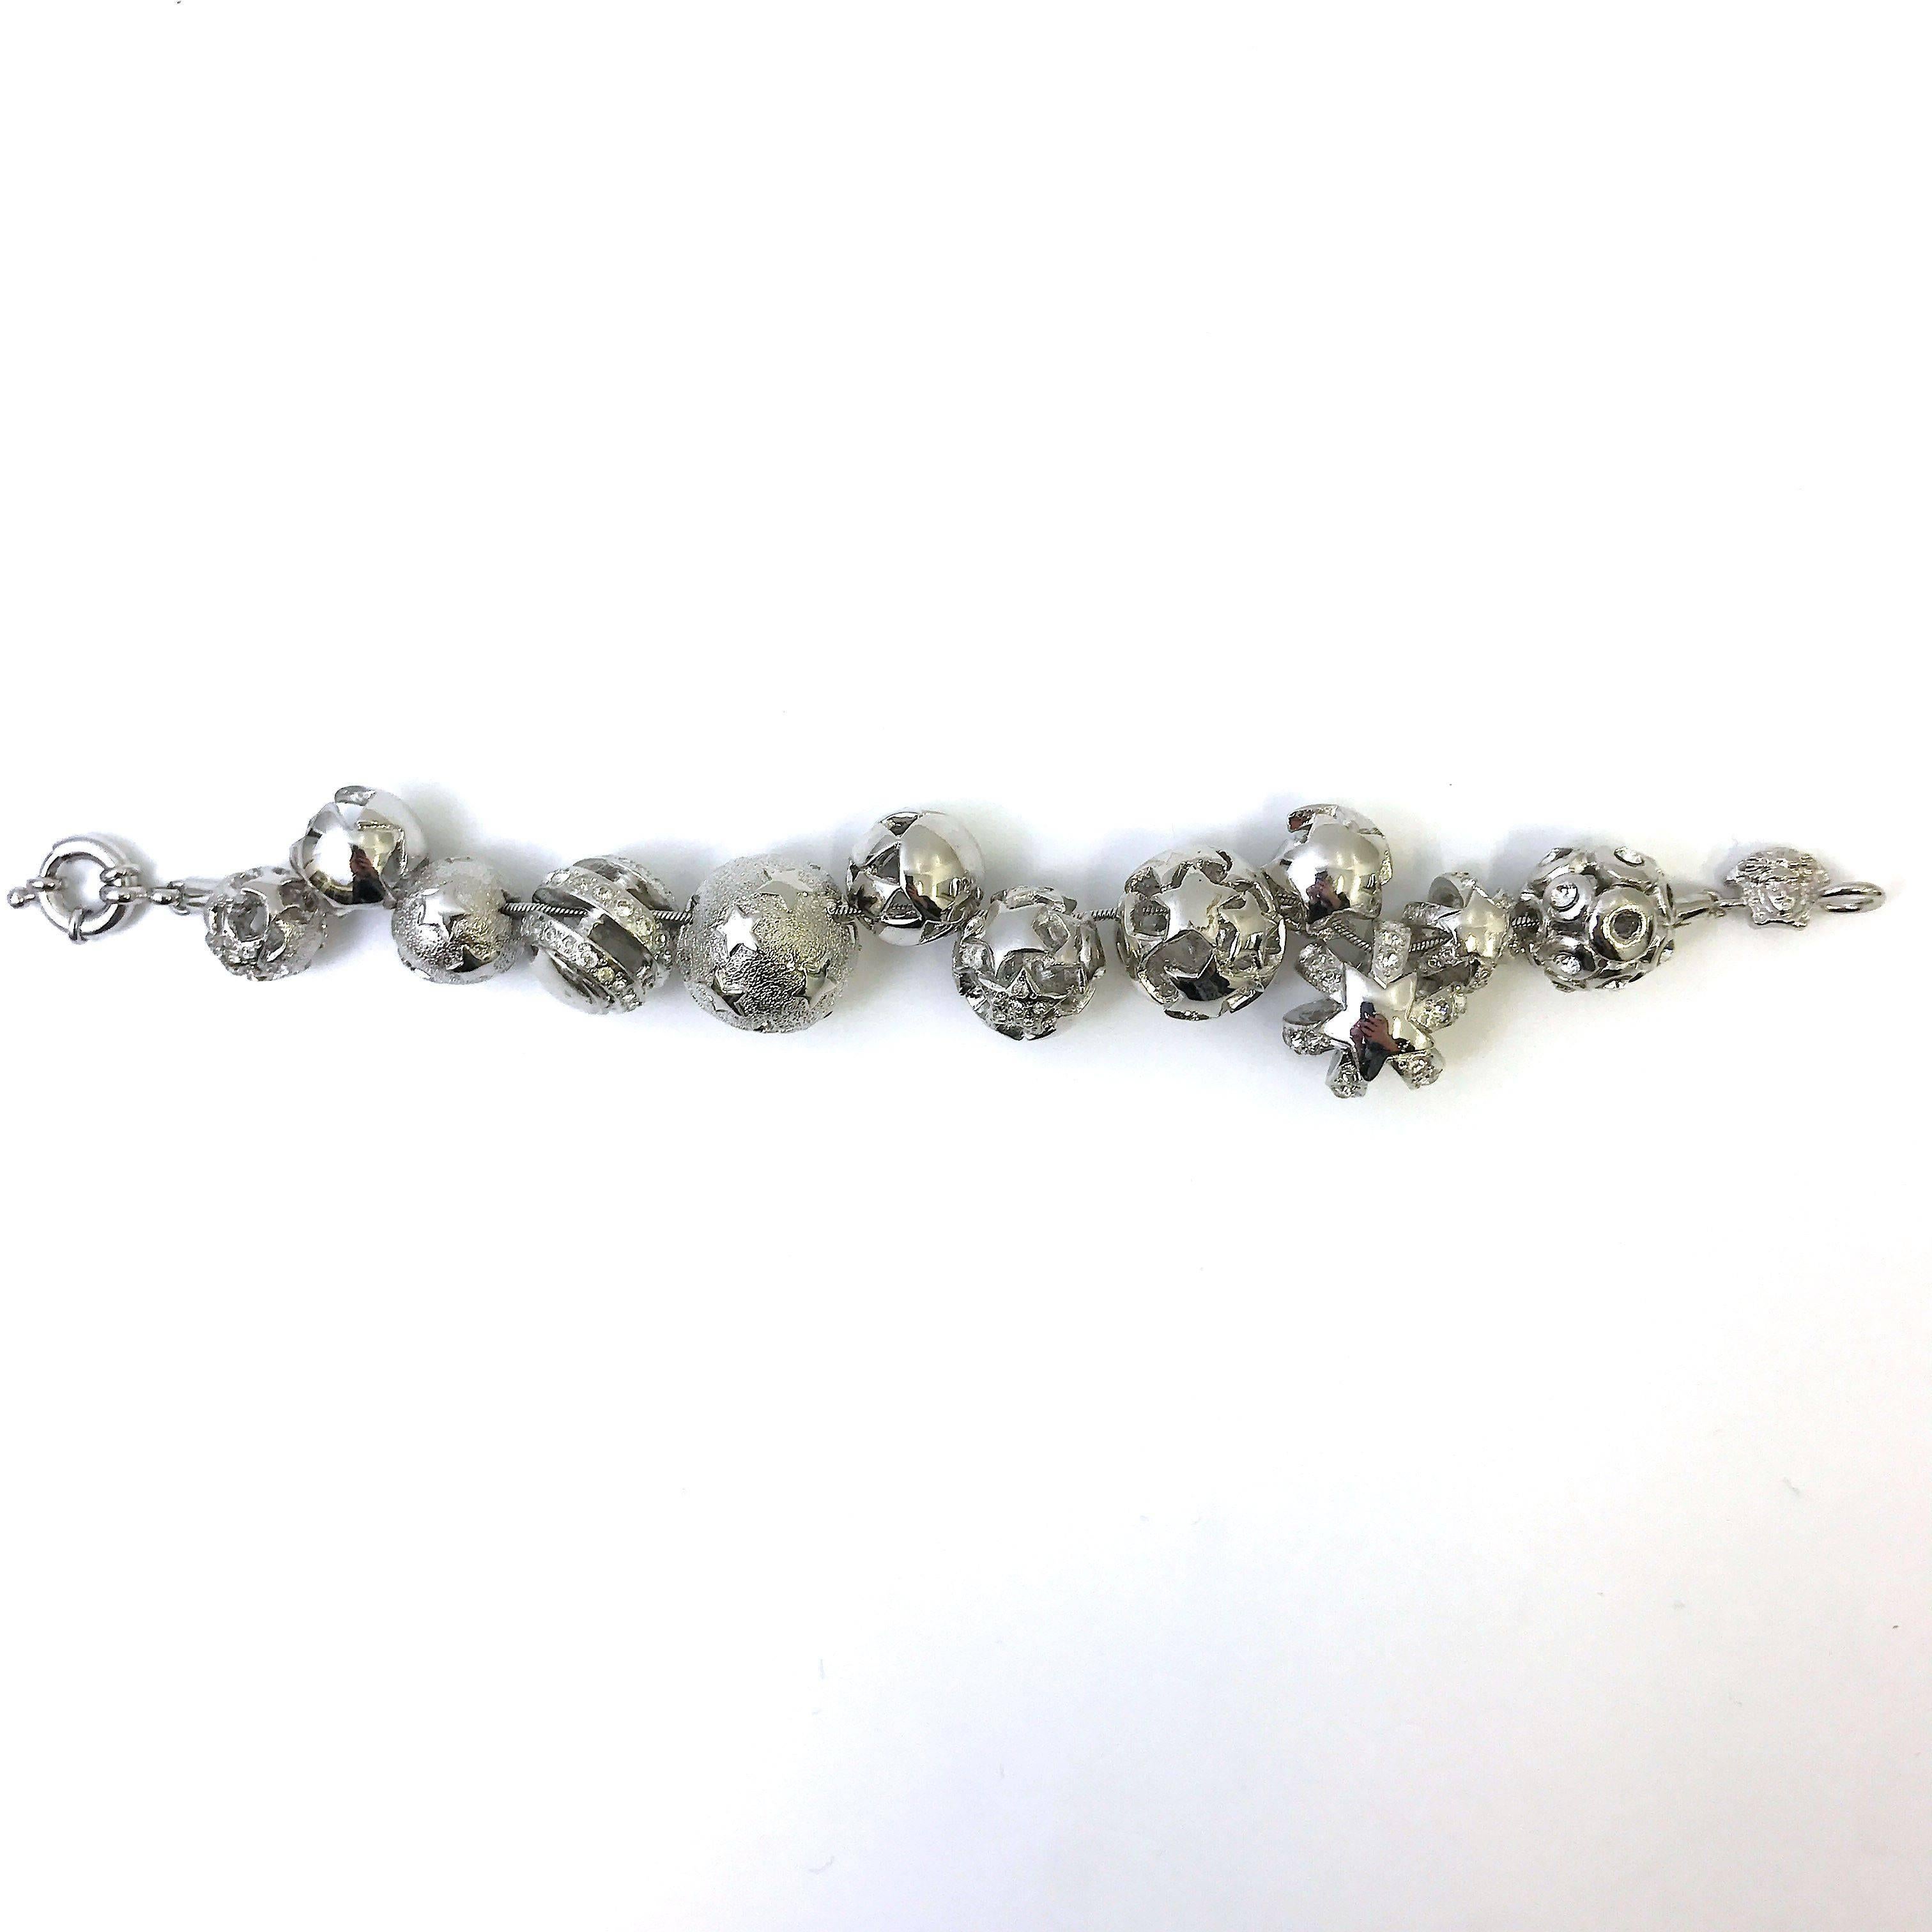 This bracelet by Gianni Versace is rare with it's unique detailing of balls with different cut-out patterns. The silver tone complements beautifully against the sparkling stones. The balls are individually hand crafted and are unique to themselves